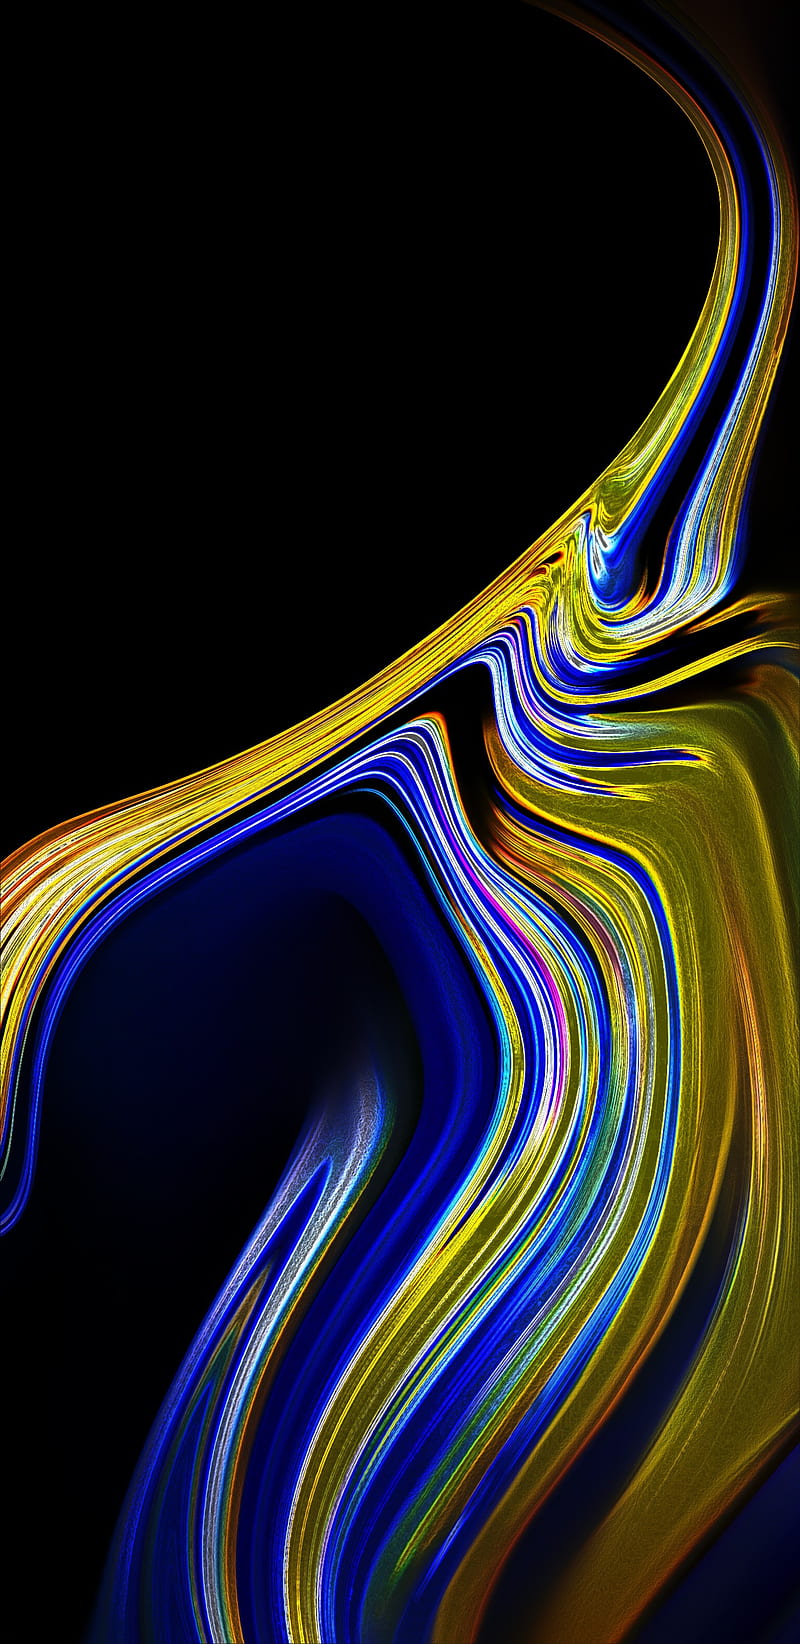 Note 9 Stock neon, blue, edge, epic, galaxy, gold, note 9, samsung, HD phone wallpaper